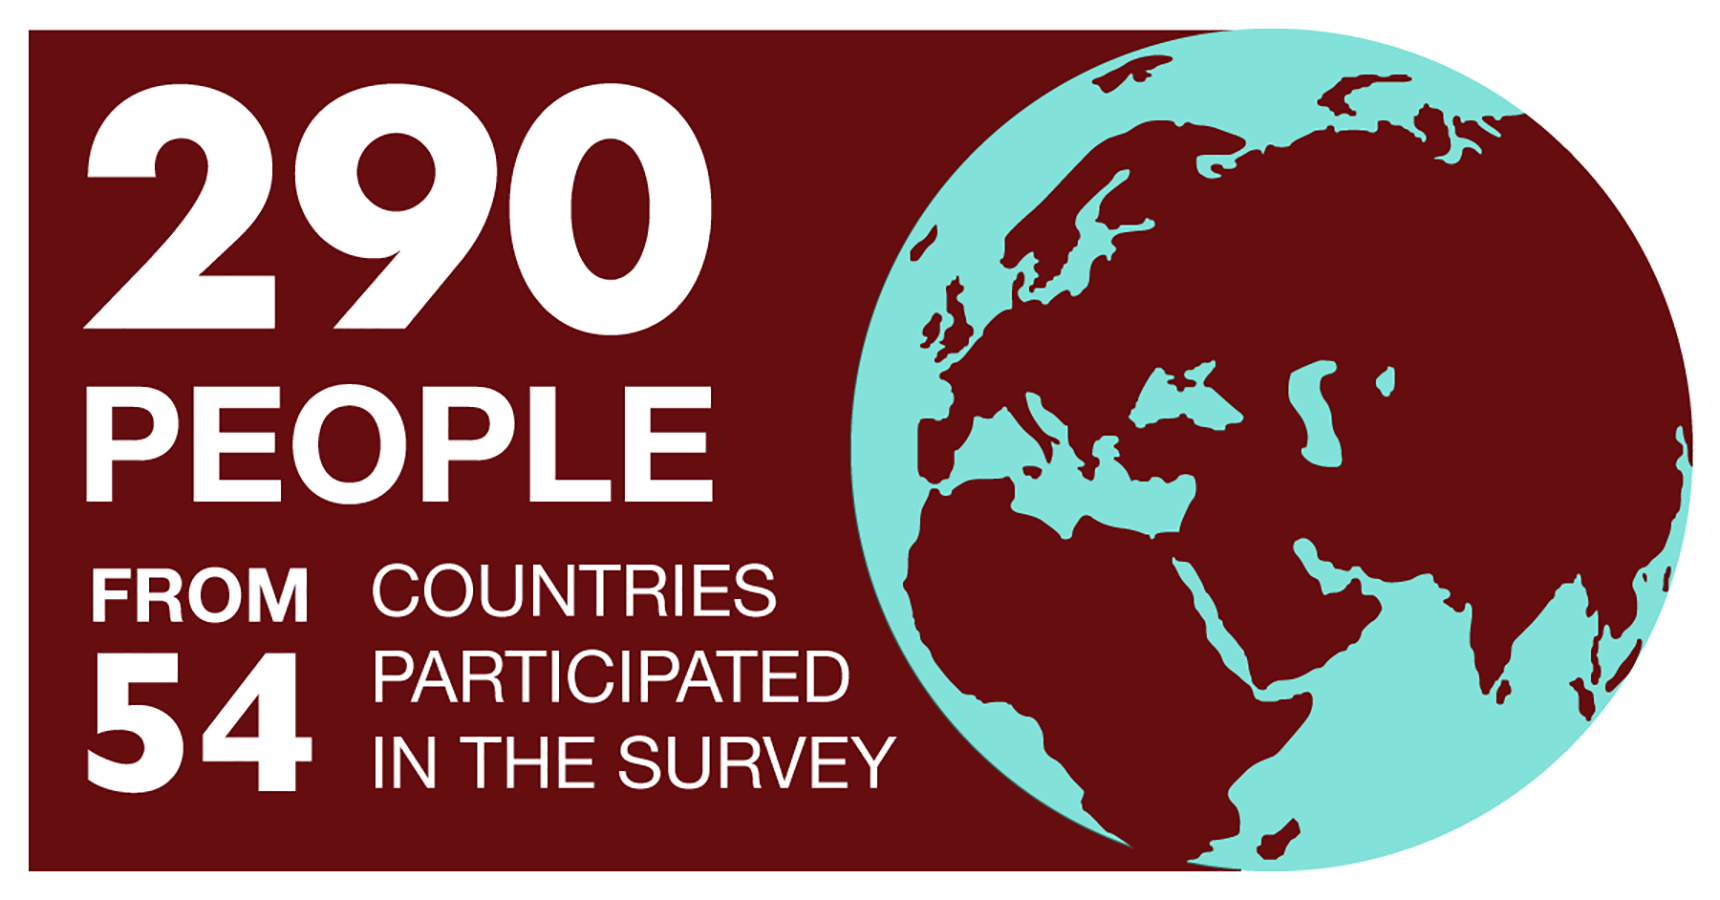 Illustration of a globe. To the left of it large text reads '290 people from 54 countries participated in the survey'.